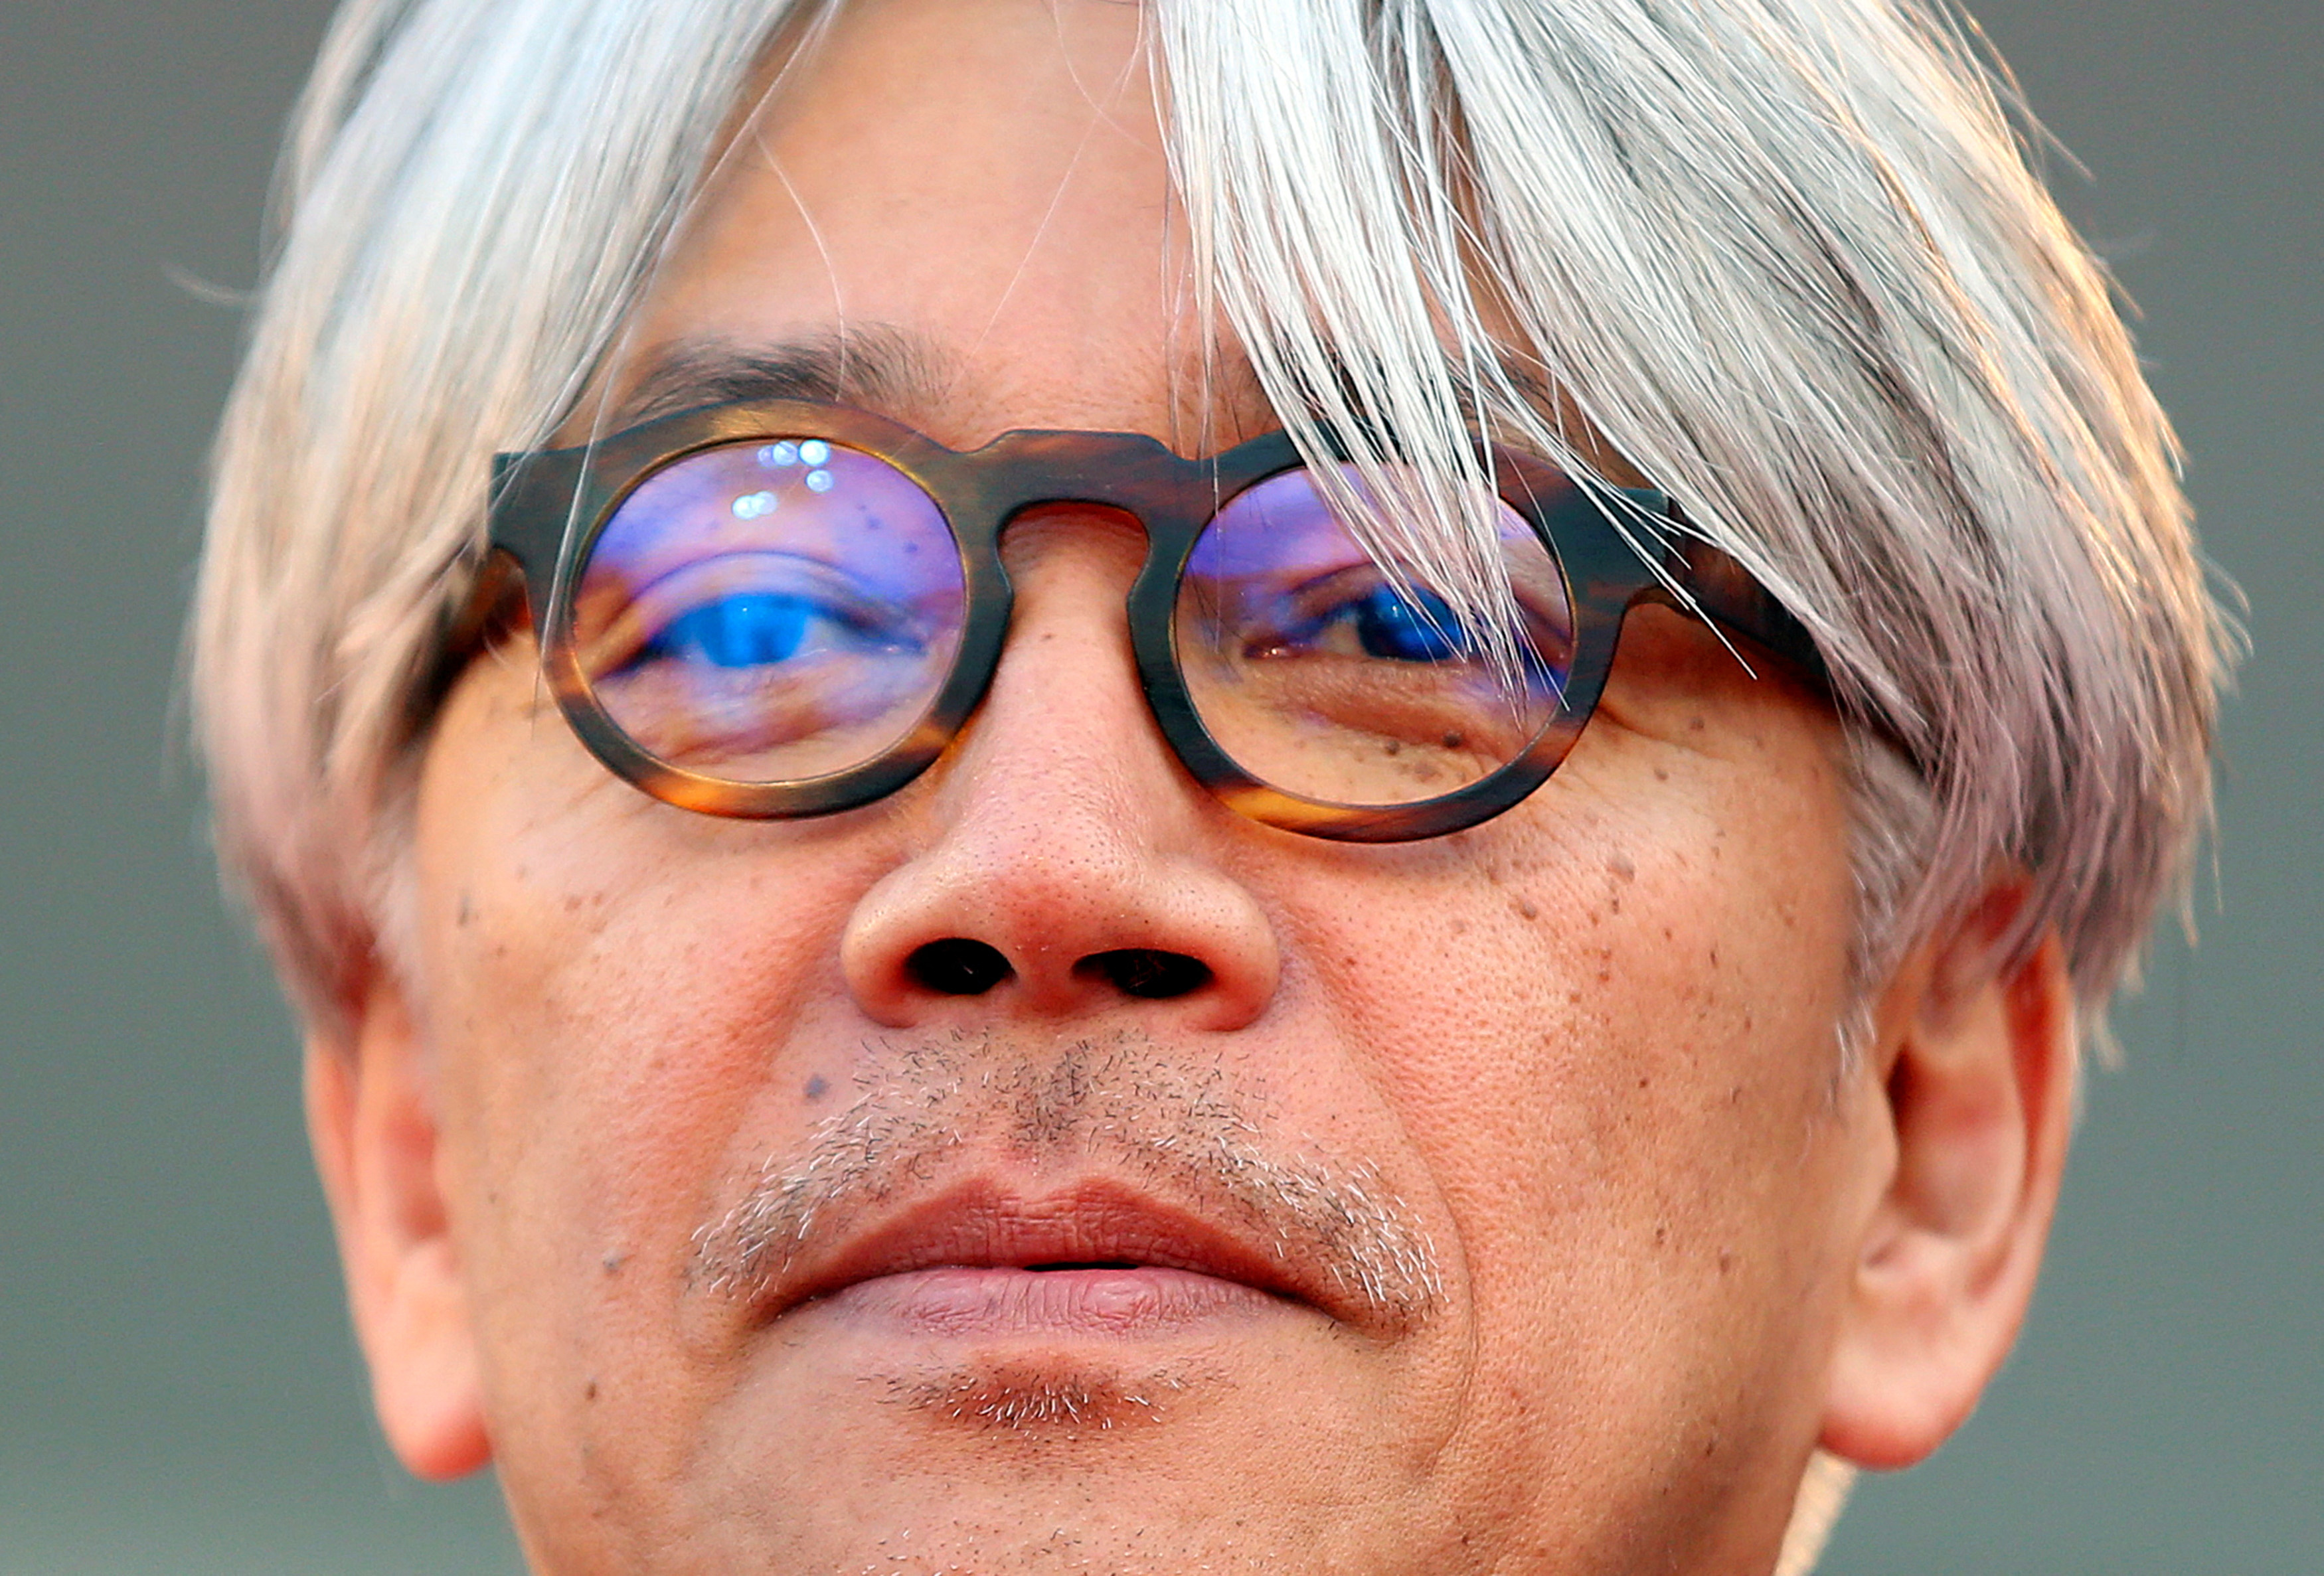 Sakamoto, jury member and Japanese musician, looks on as he arrives on the red carpet for the premiere of 